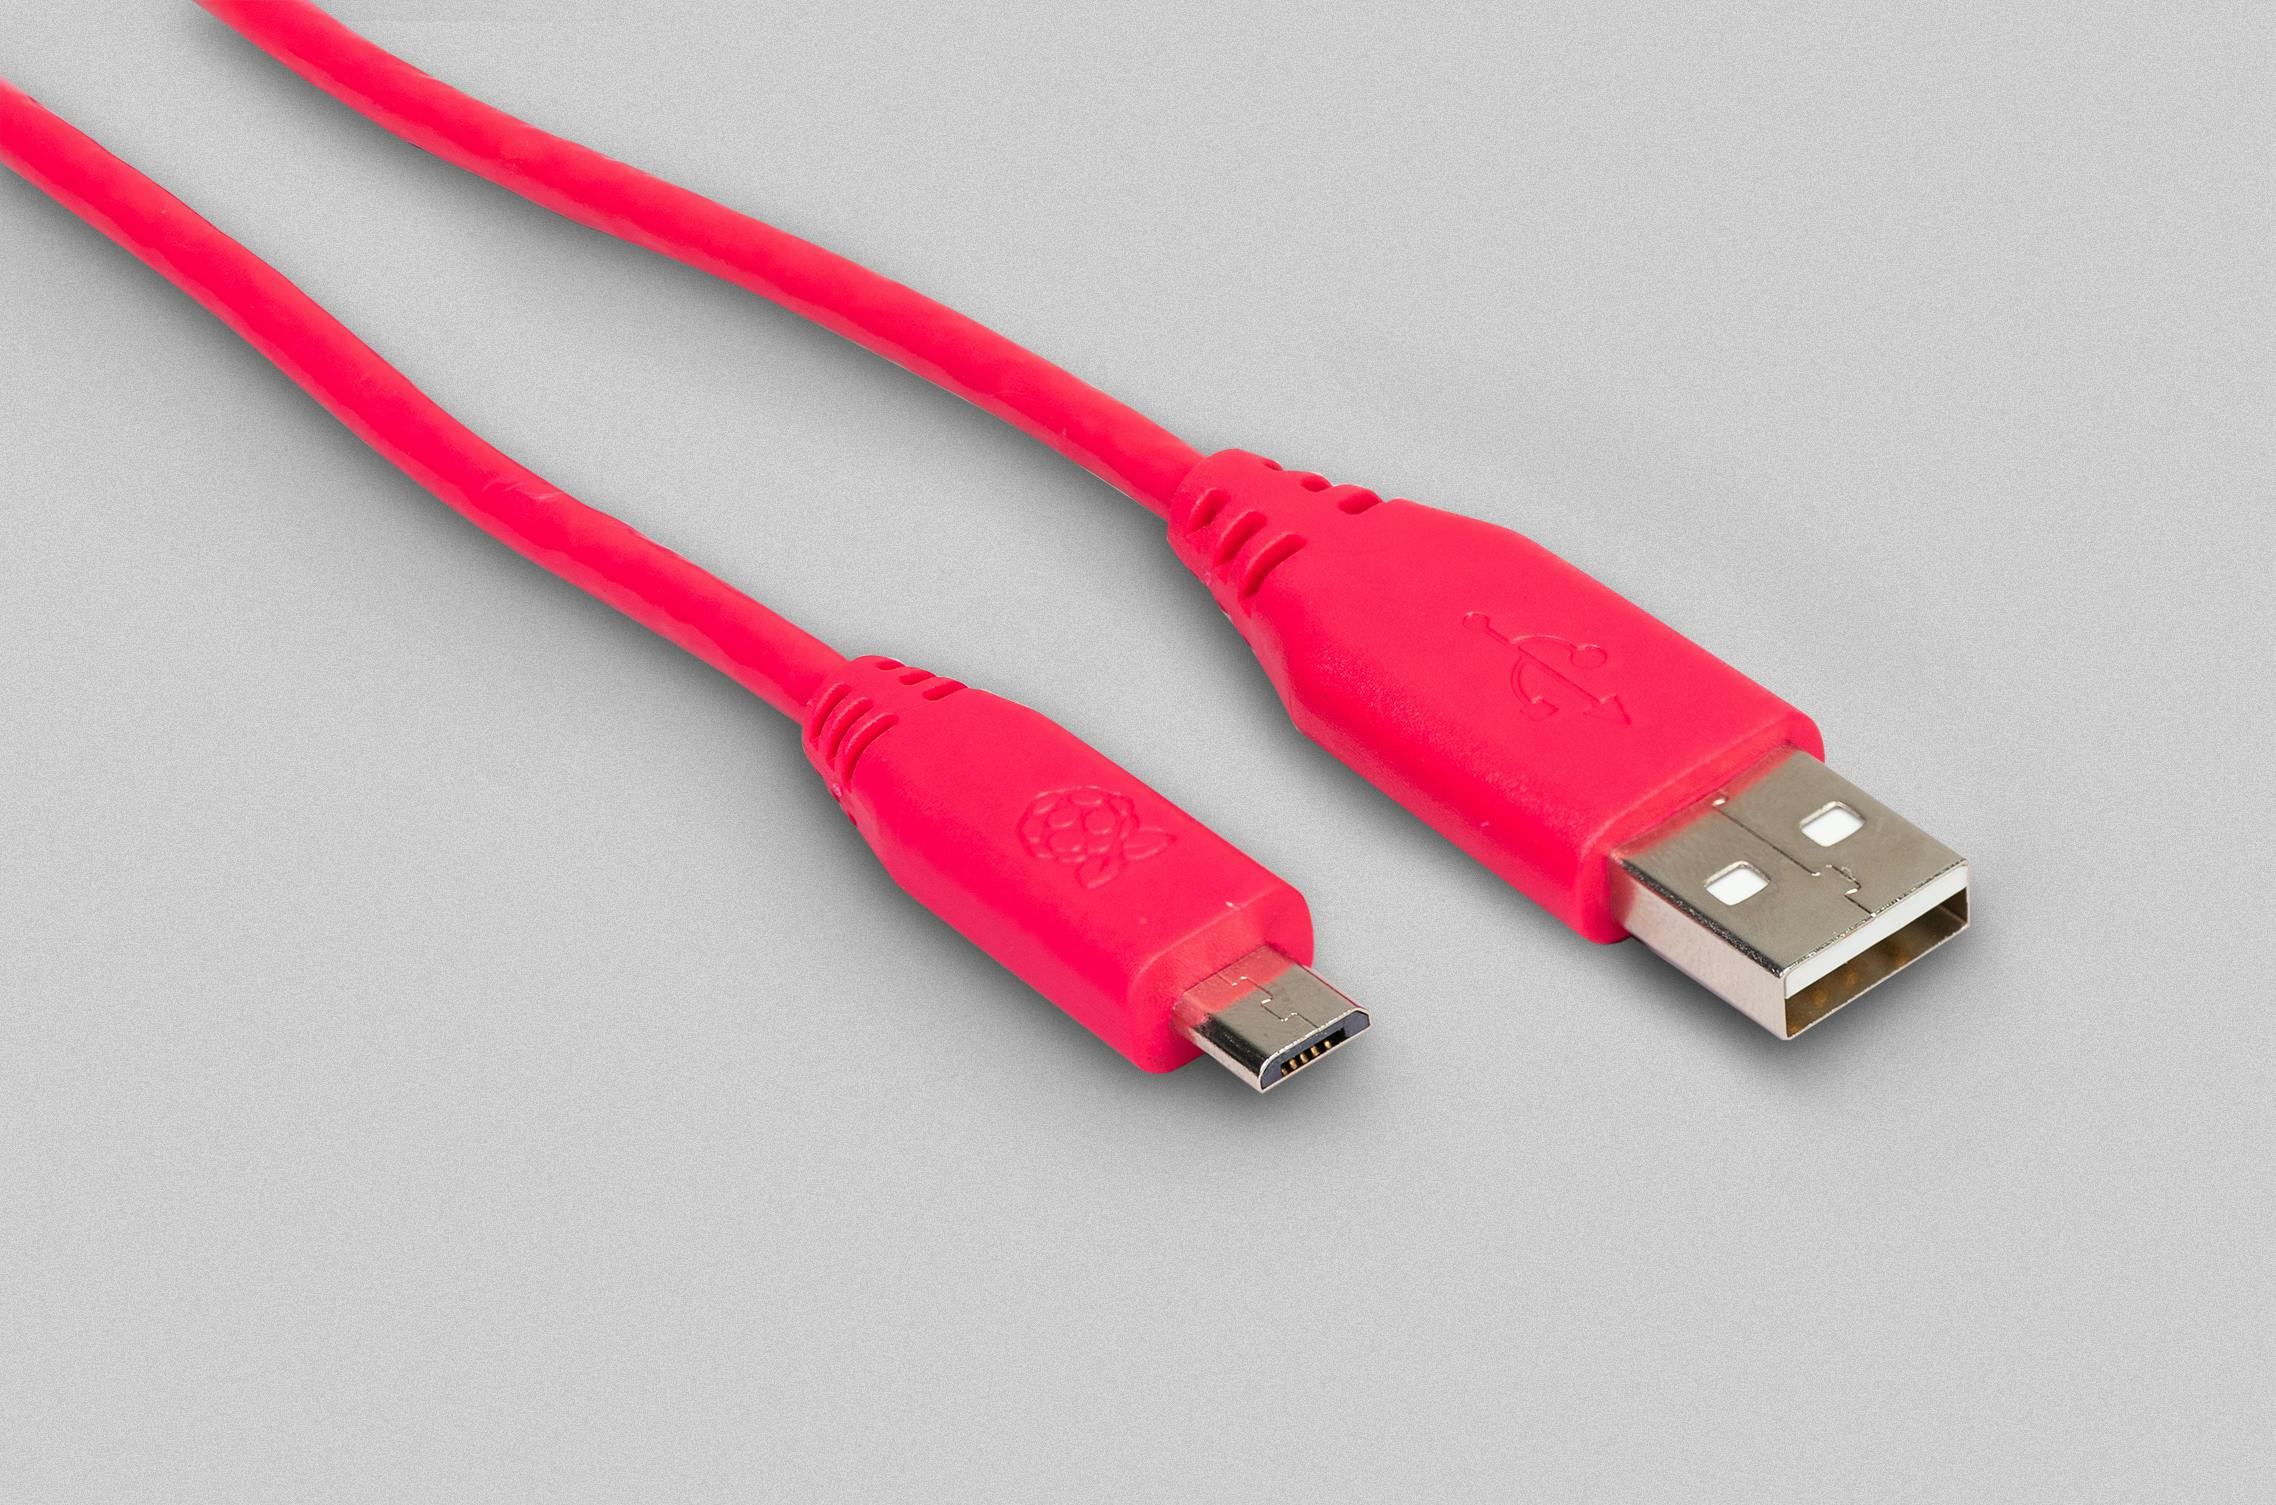 MicroUSB Cable